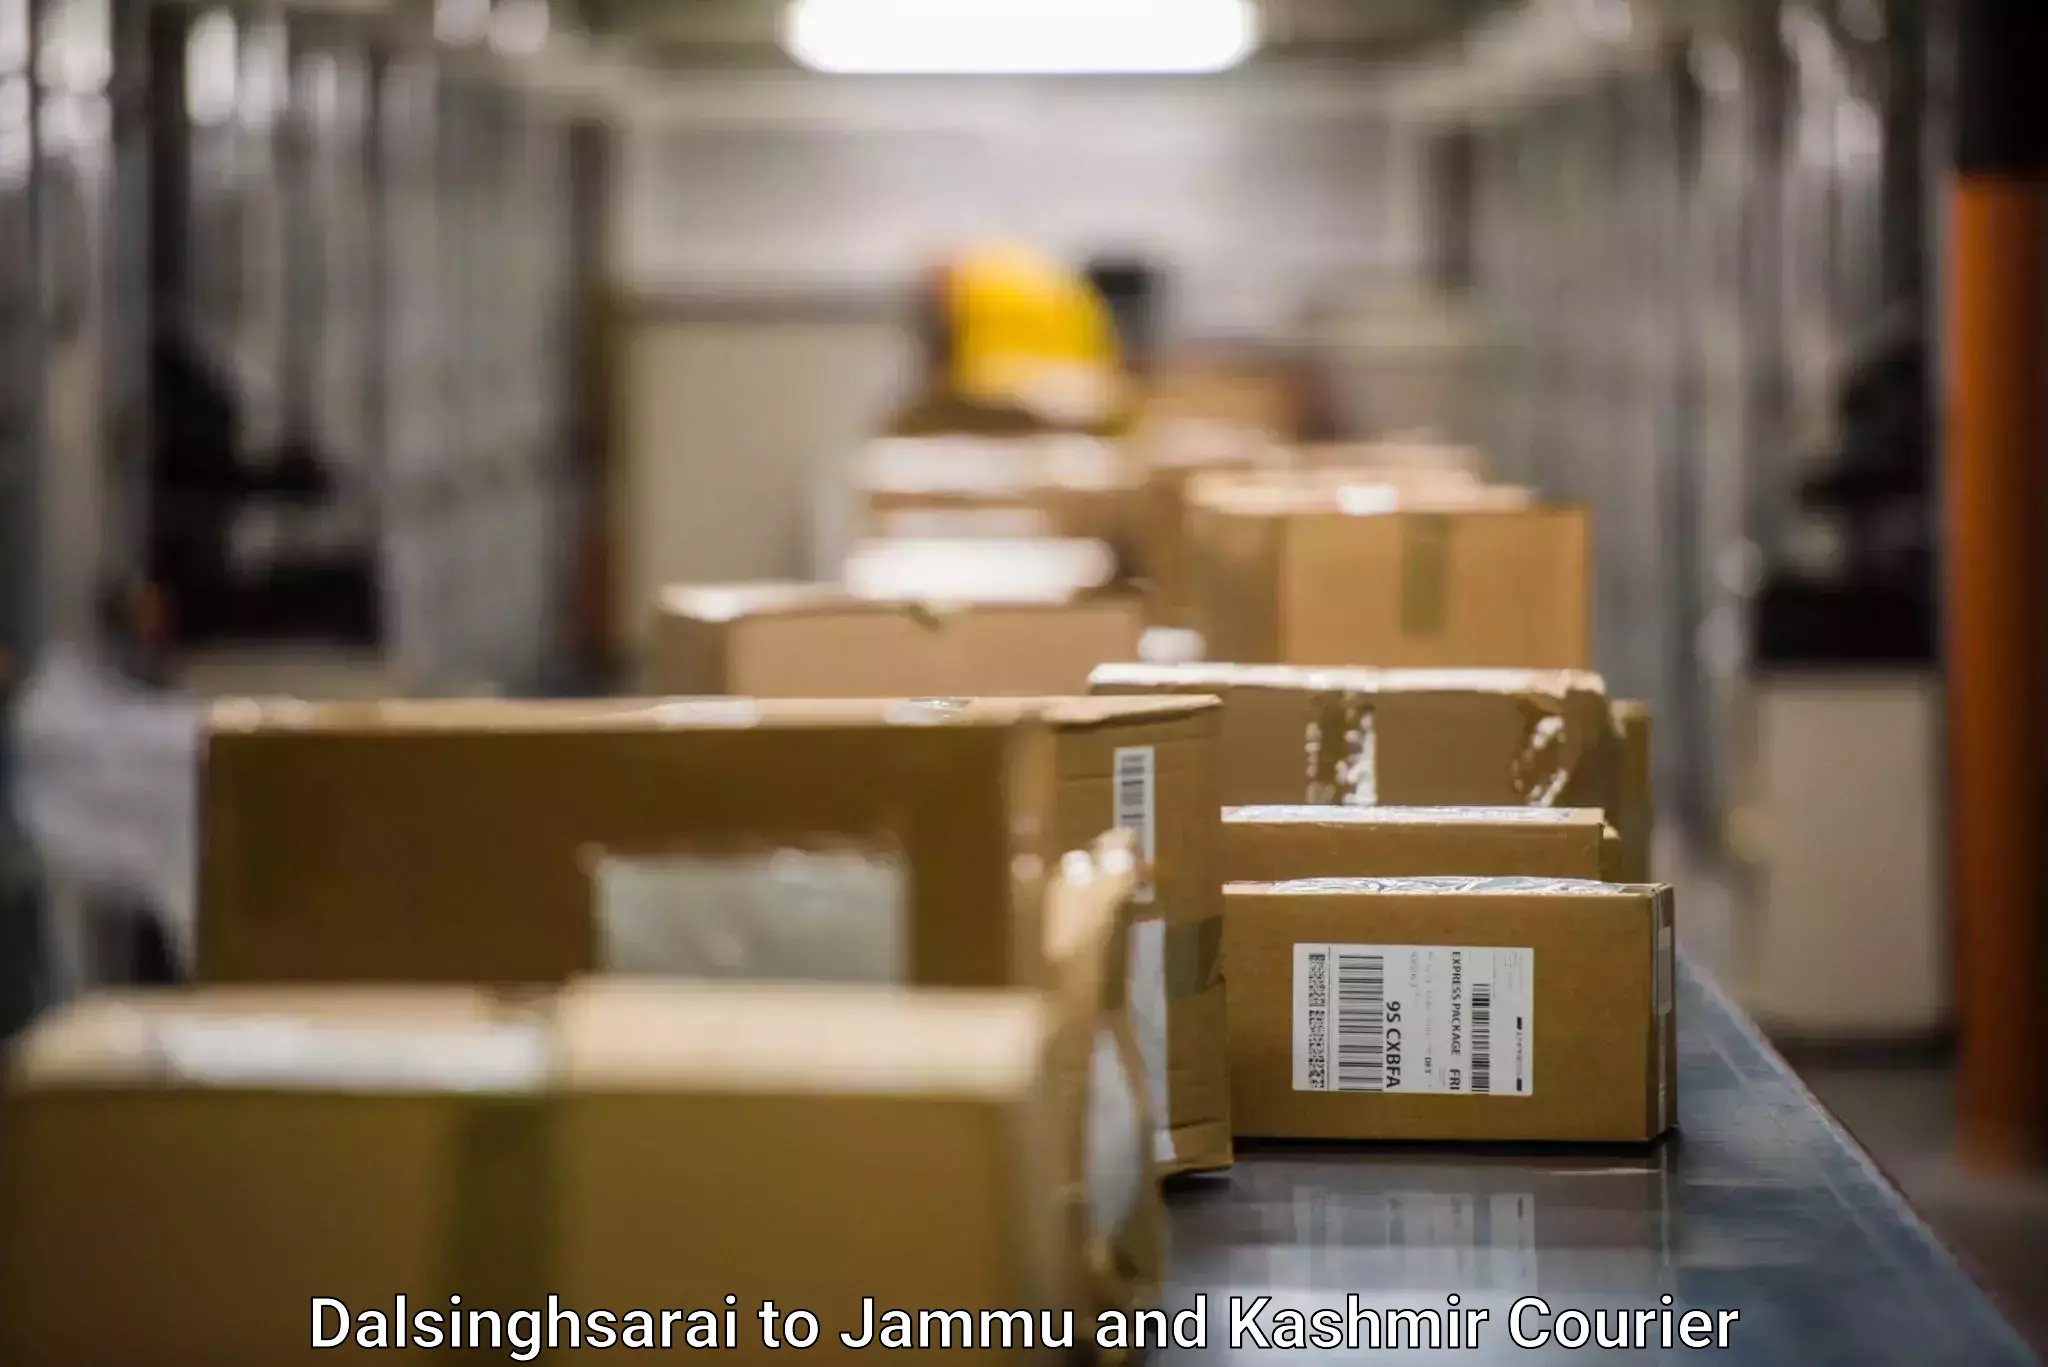 Rapid shipping services Dalsinghsarai to Pulwama